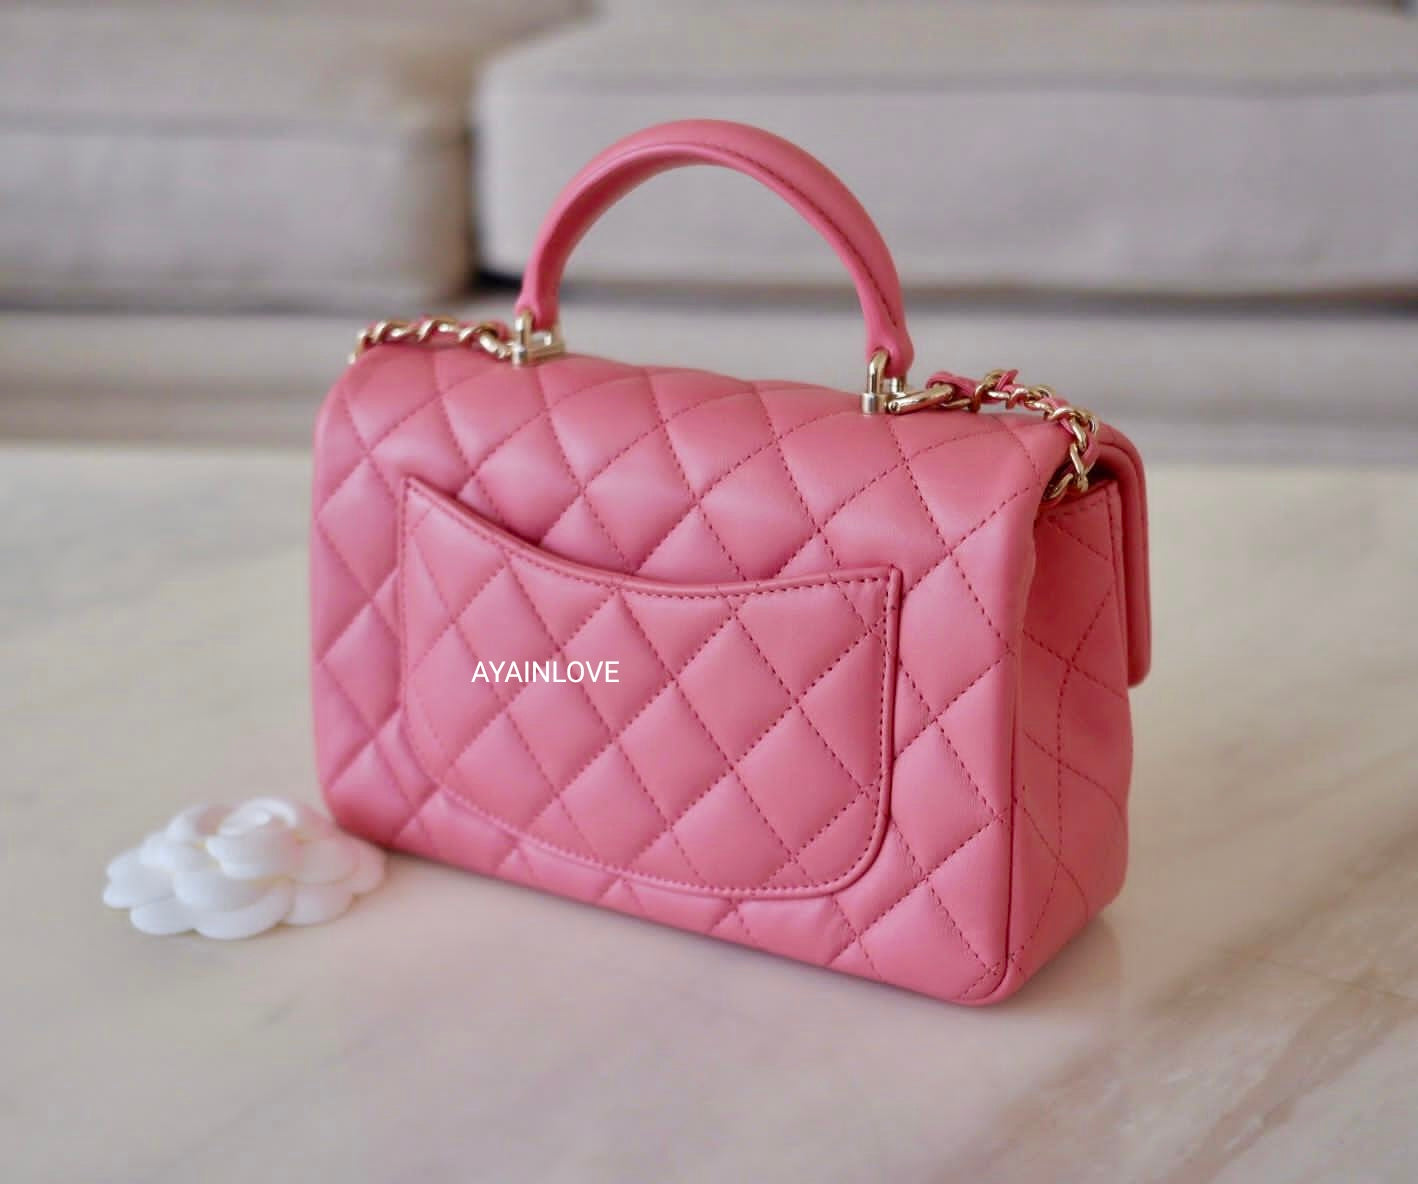 Chanel Mini Flap Bag With Top Handle Light Pink in Lambskin Leather - US